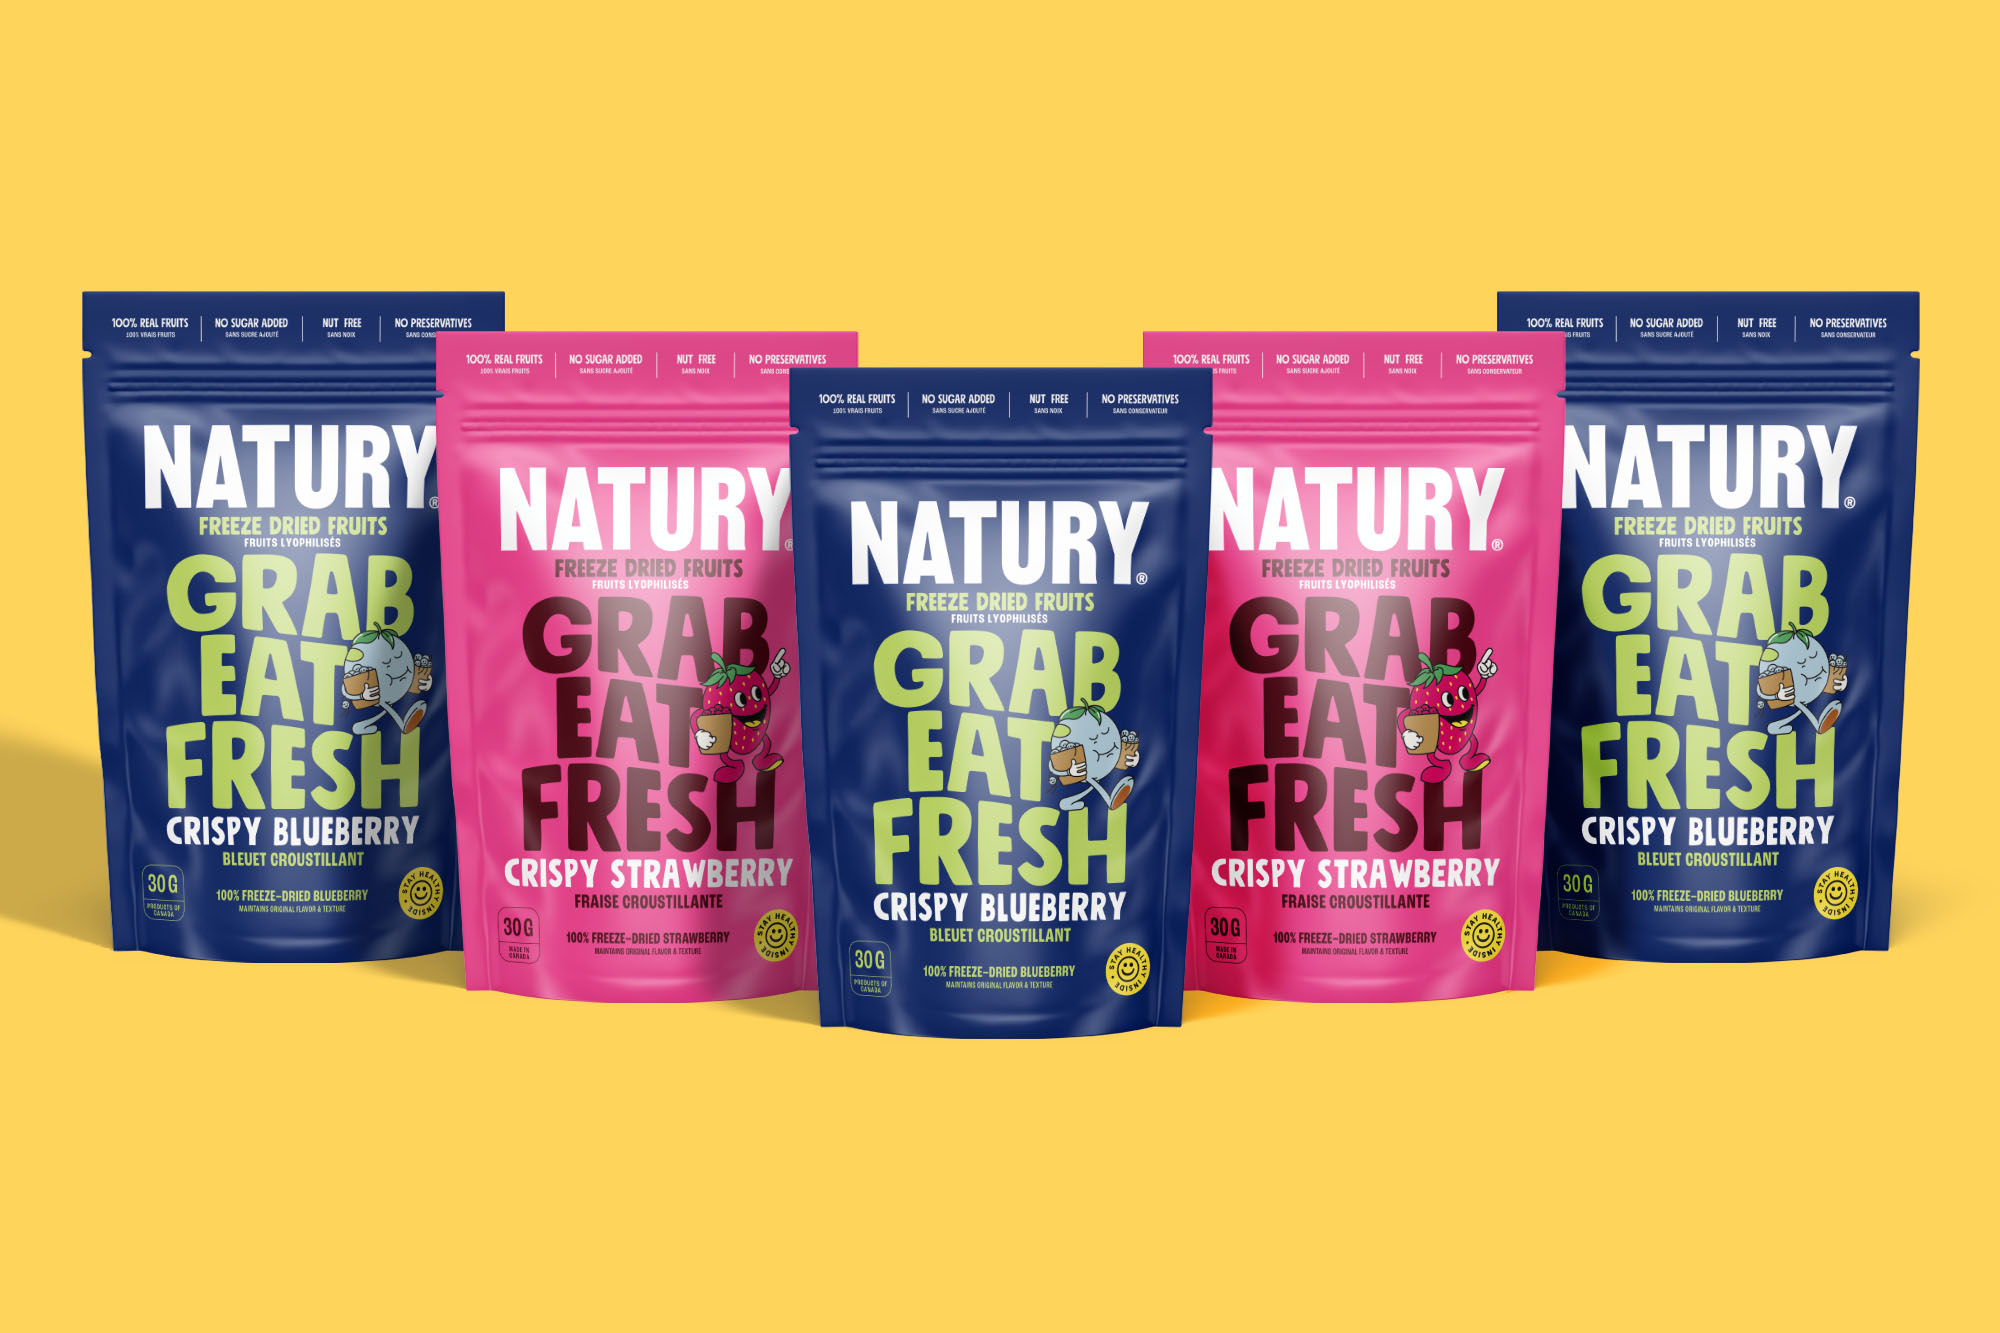 Natury Dried Fruits Brand and Packaging Design